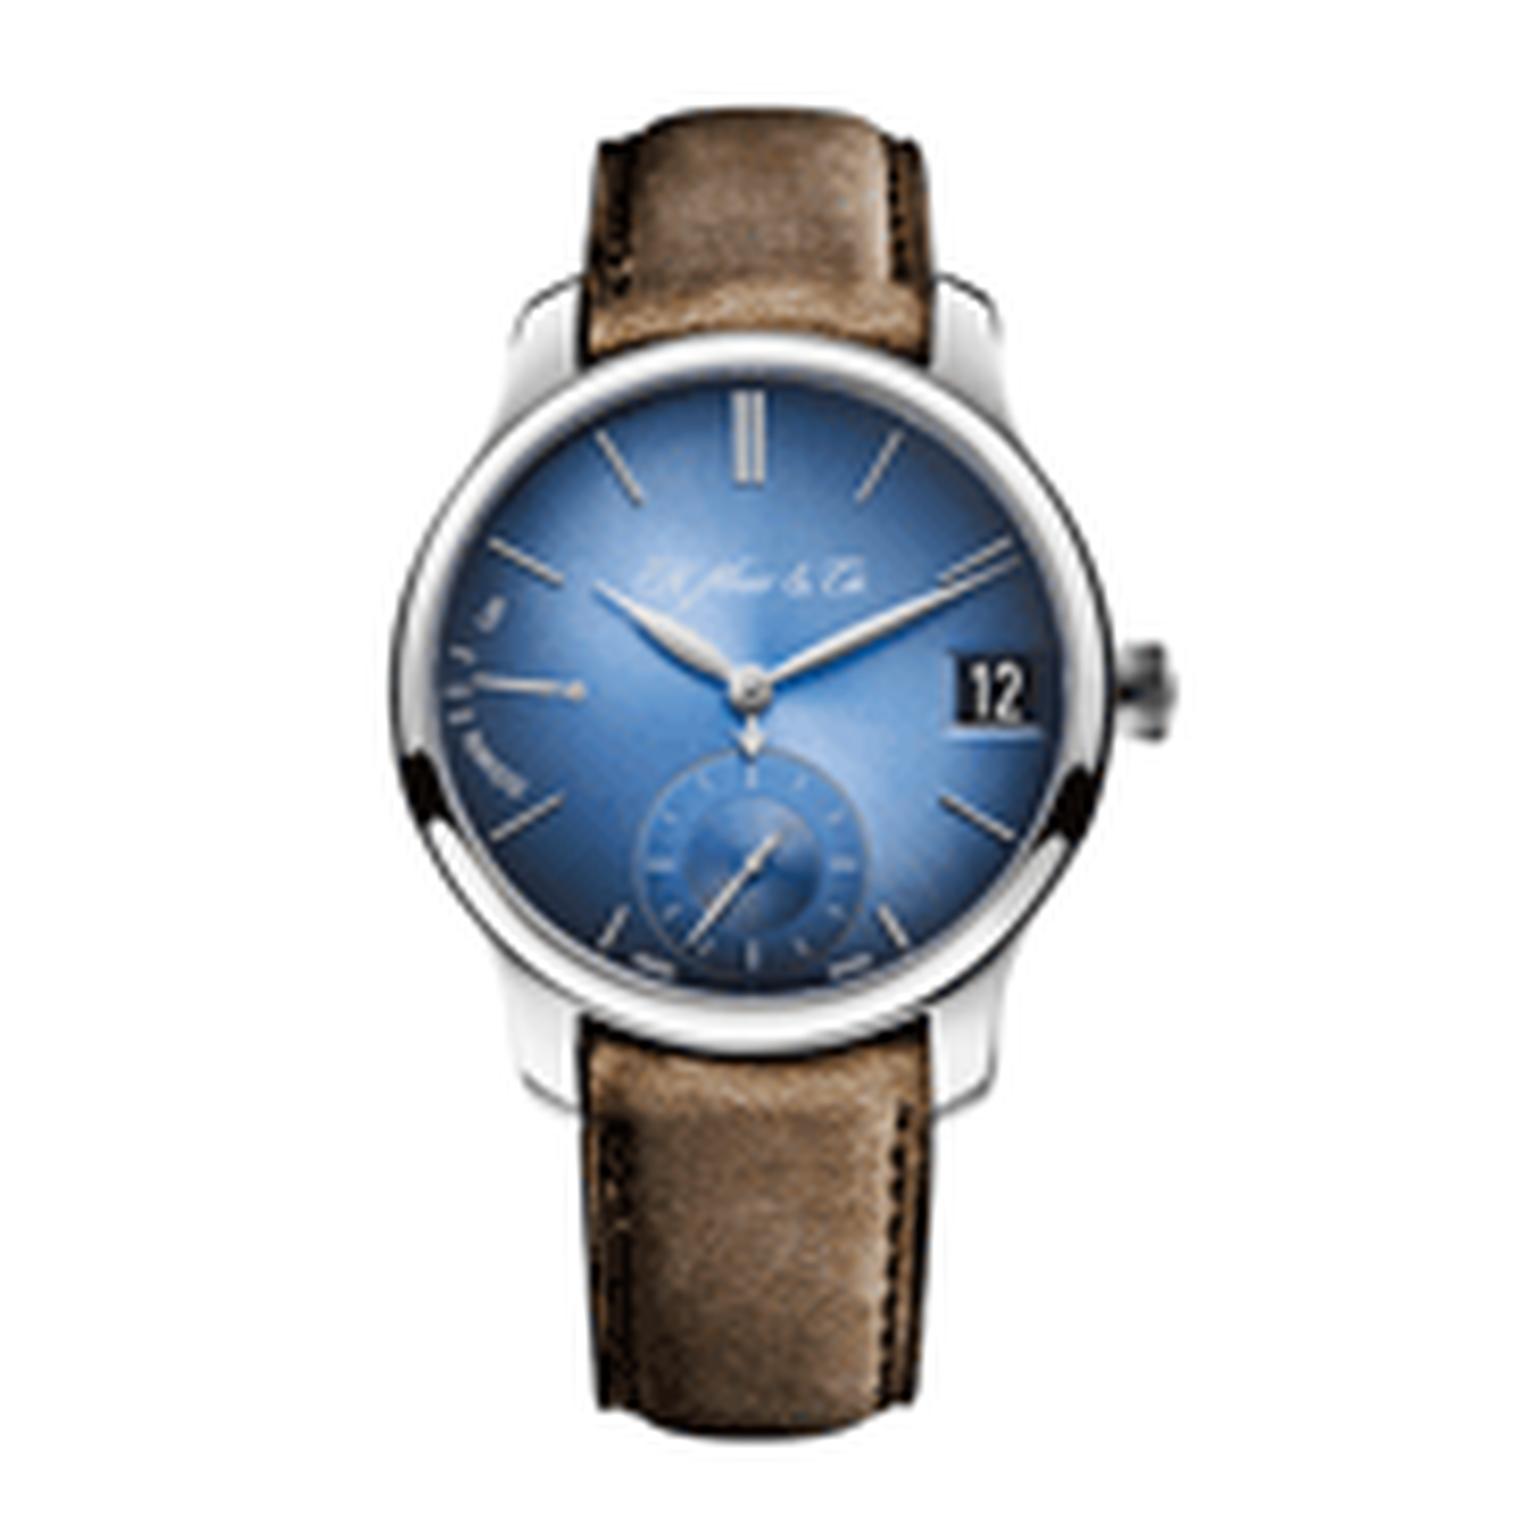 H Moser and Cie Endeavour Perpetual Calendar Funky Blue watch_thumb